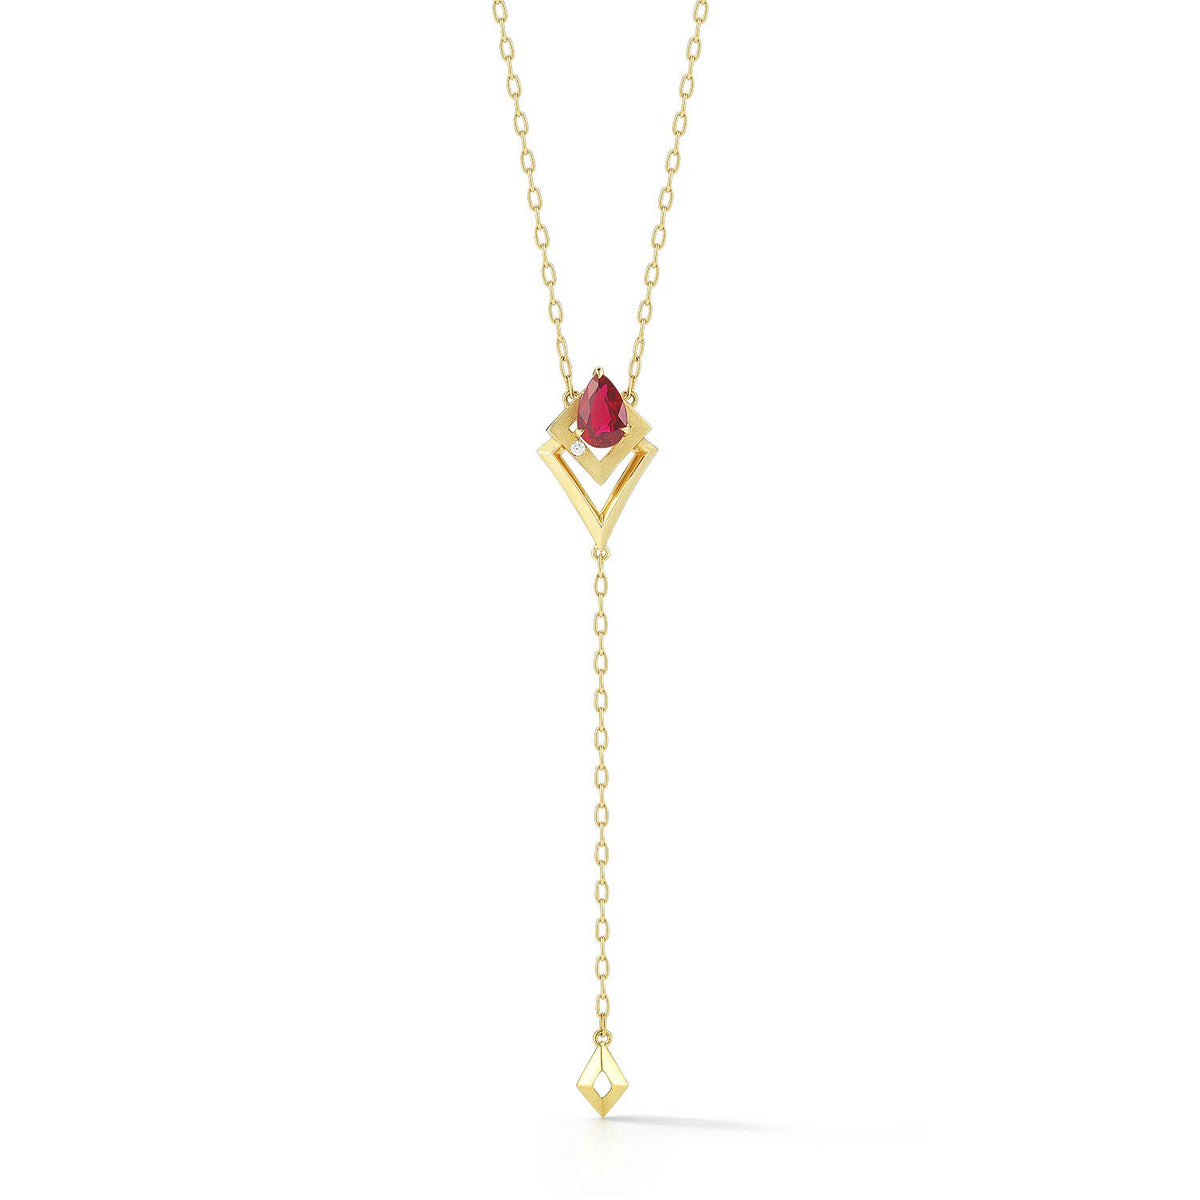 Valani 18K Yellow Gold Arris Ruby Necklace